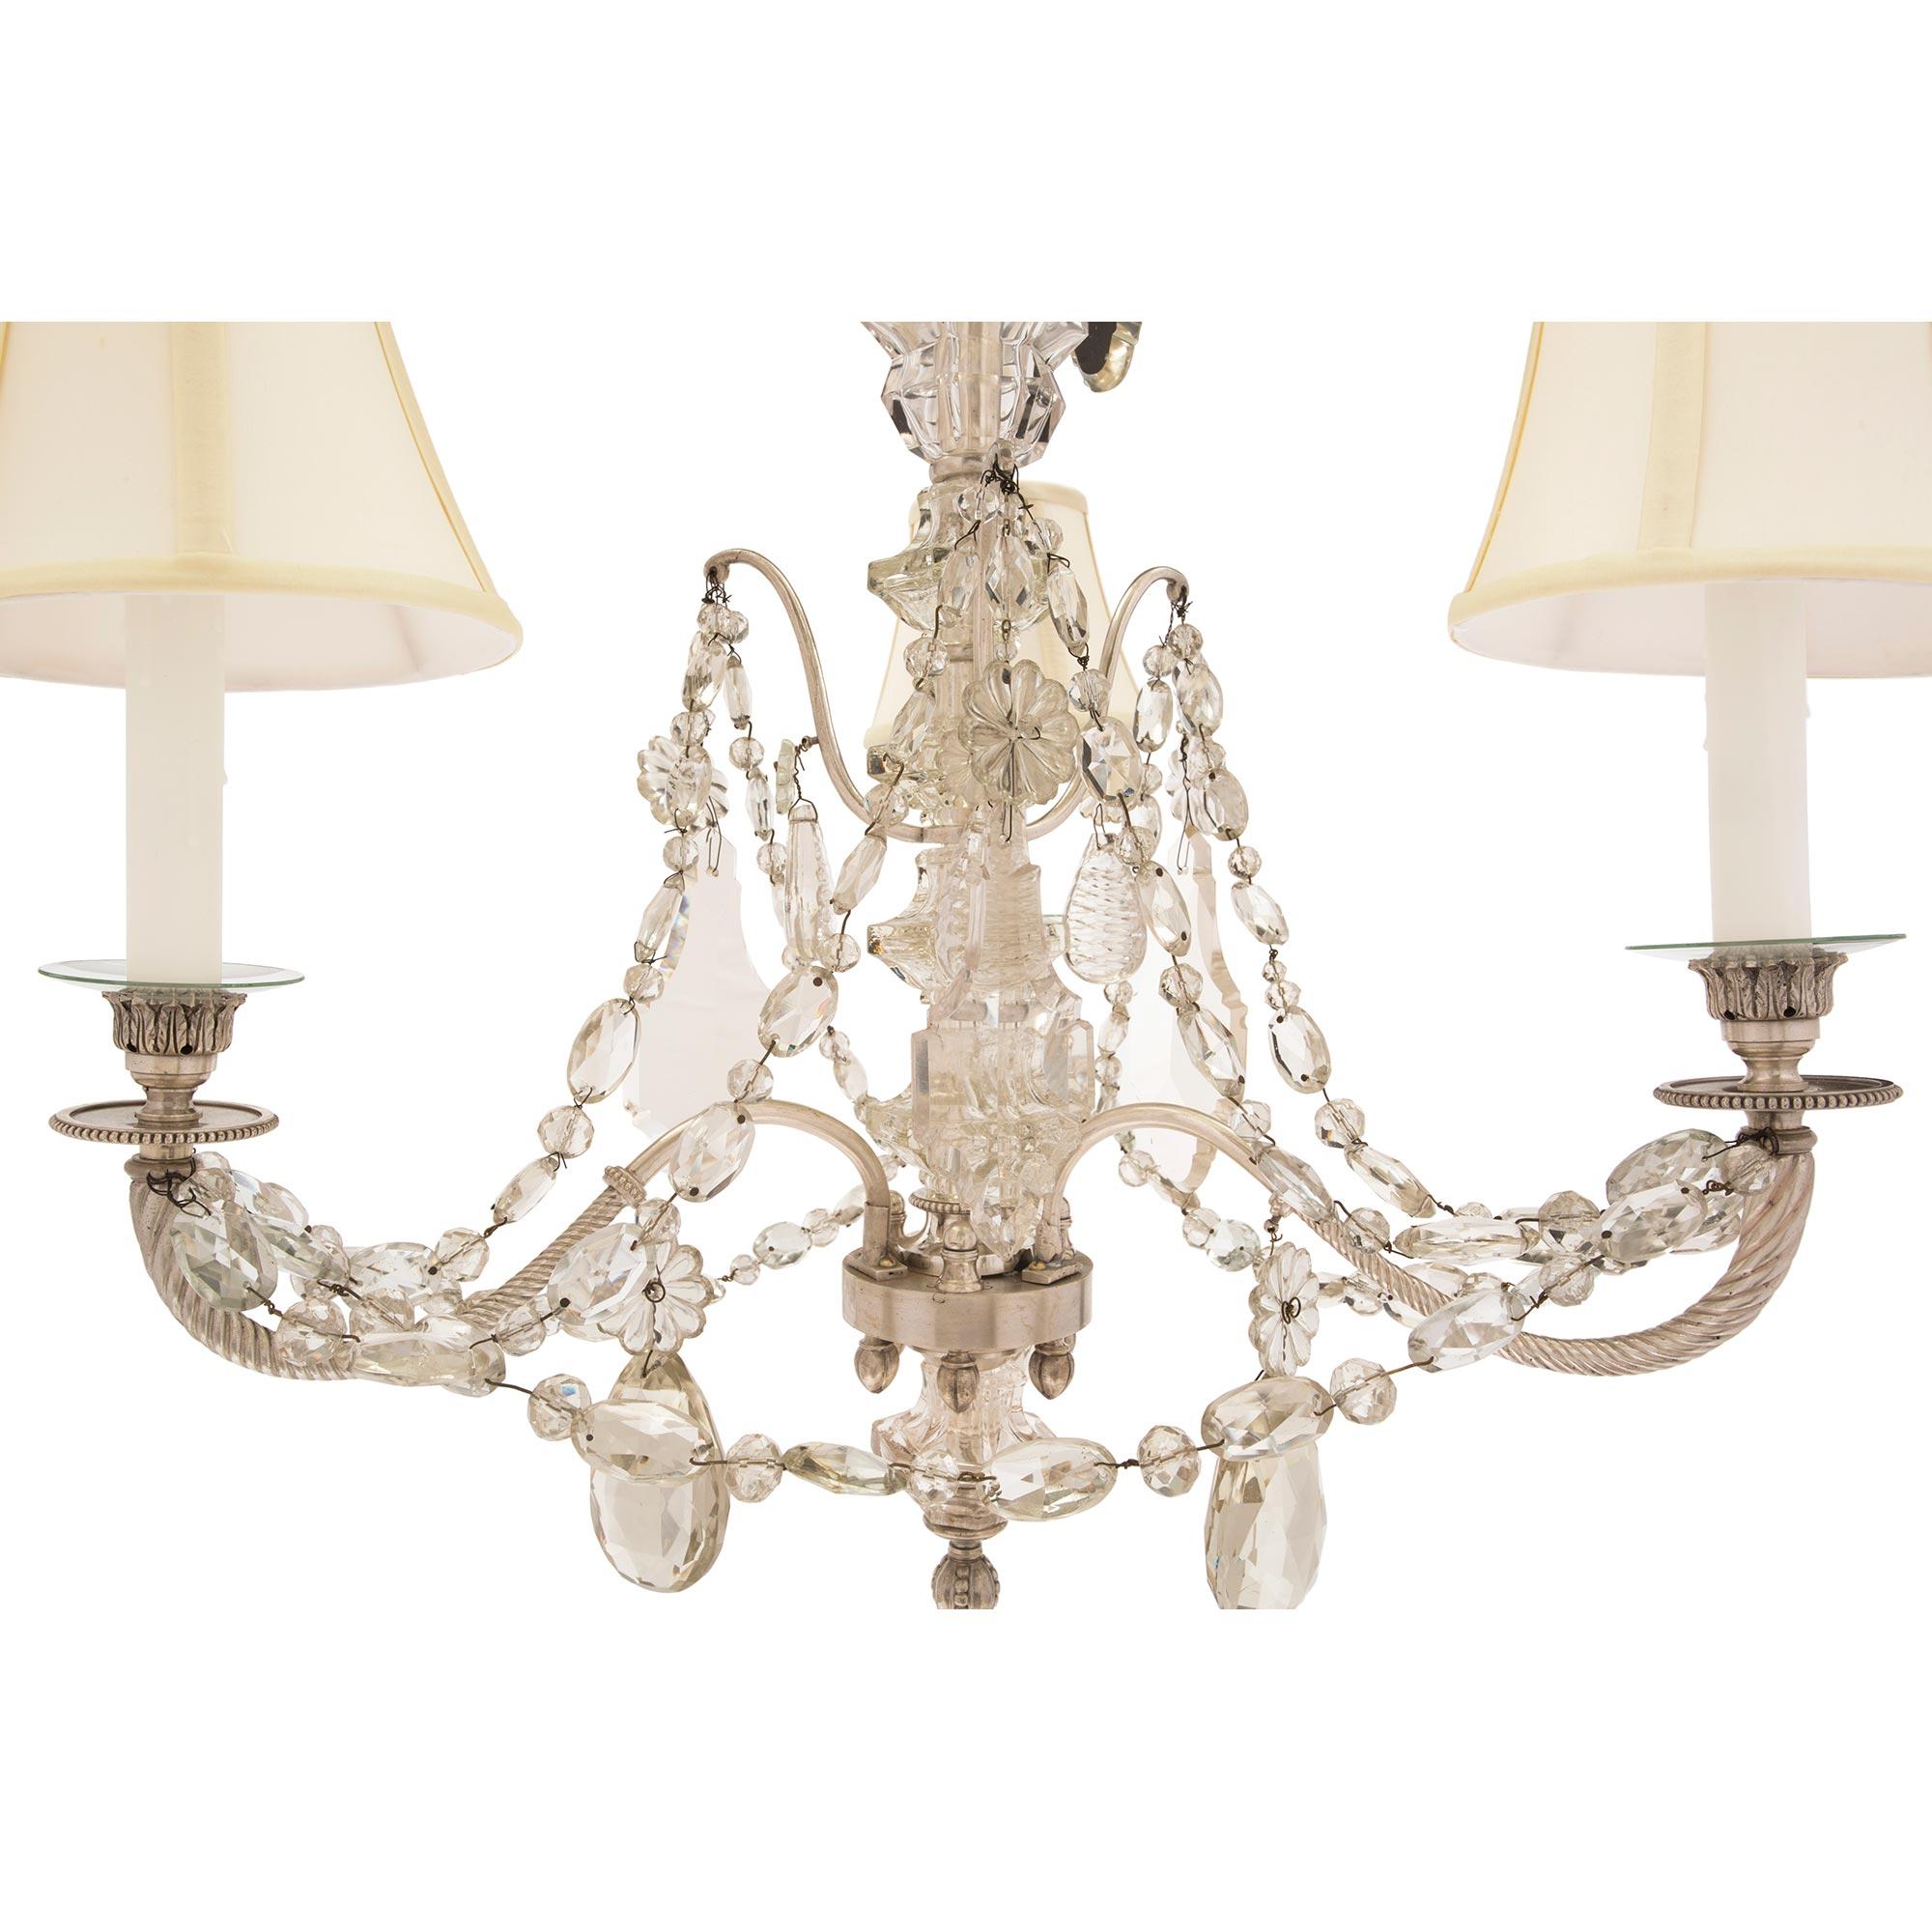 French Mid-19th Century Louis XVI Style Baccarat Crystal and Bronze Chandelier For Sale 1